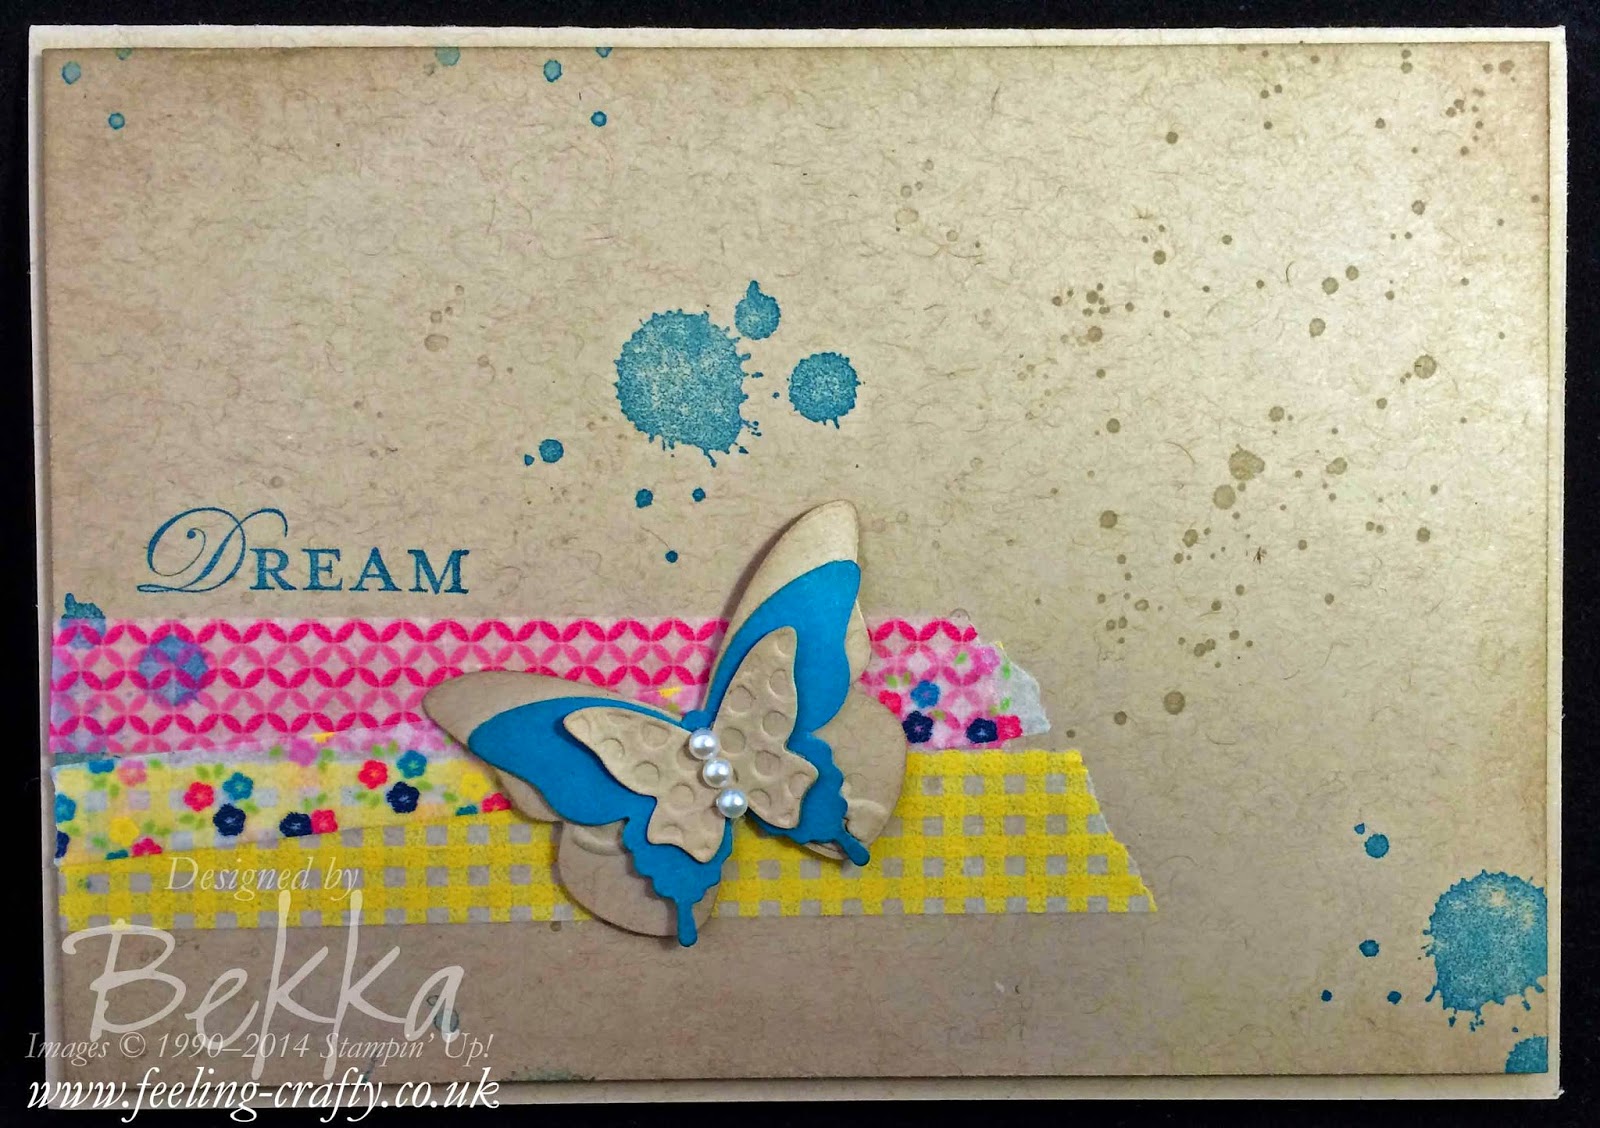 Loving Thoughts and Gingham Garden Dream Card by Bekka - check out her blog for lots of great Stampin' Up! projects from the UK